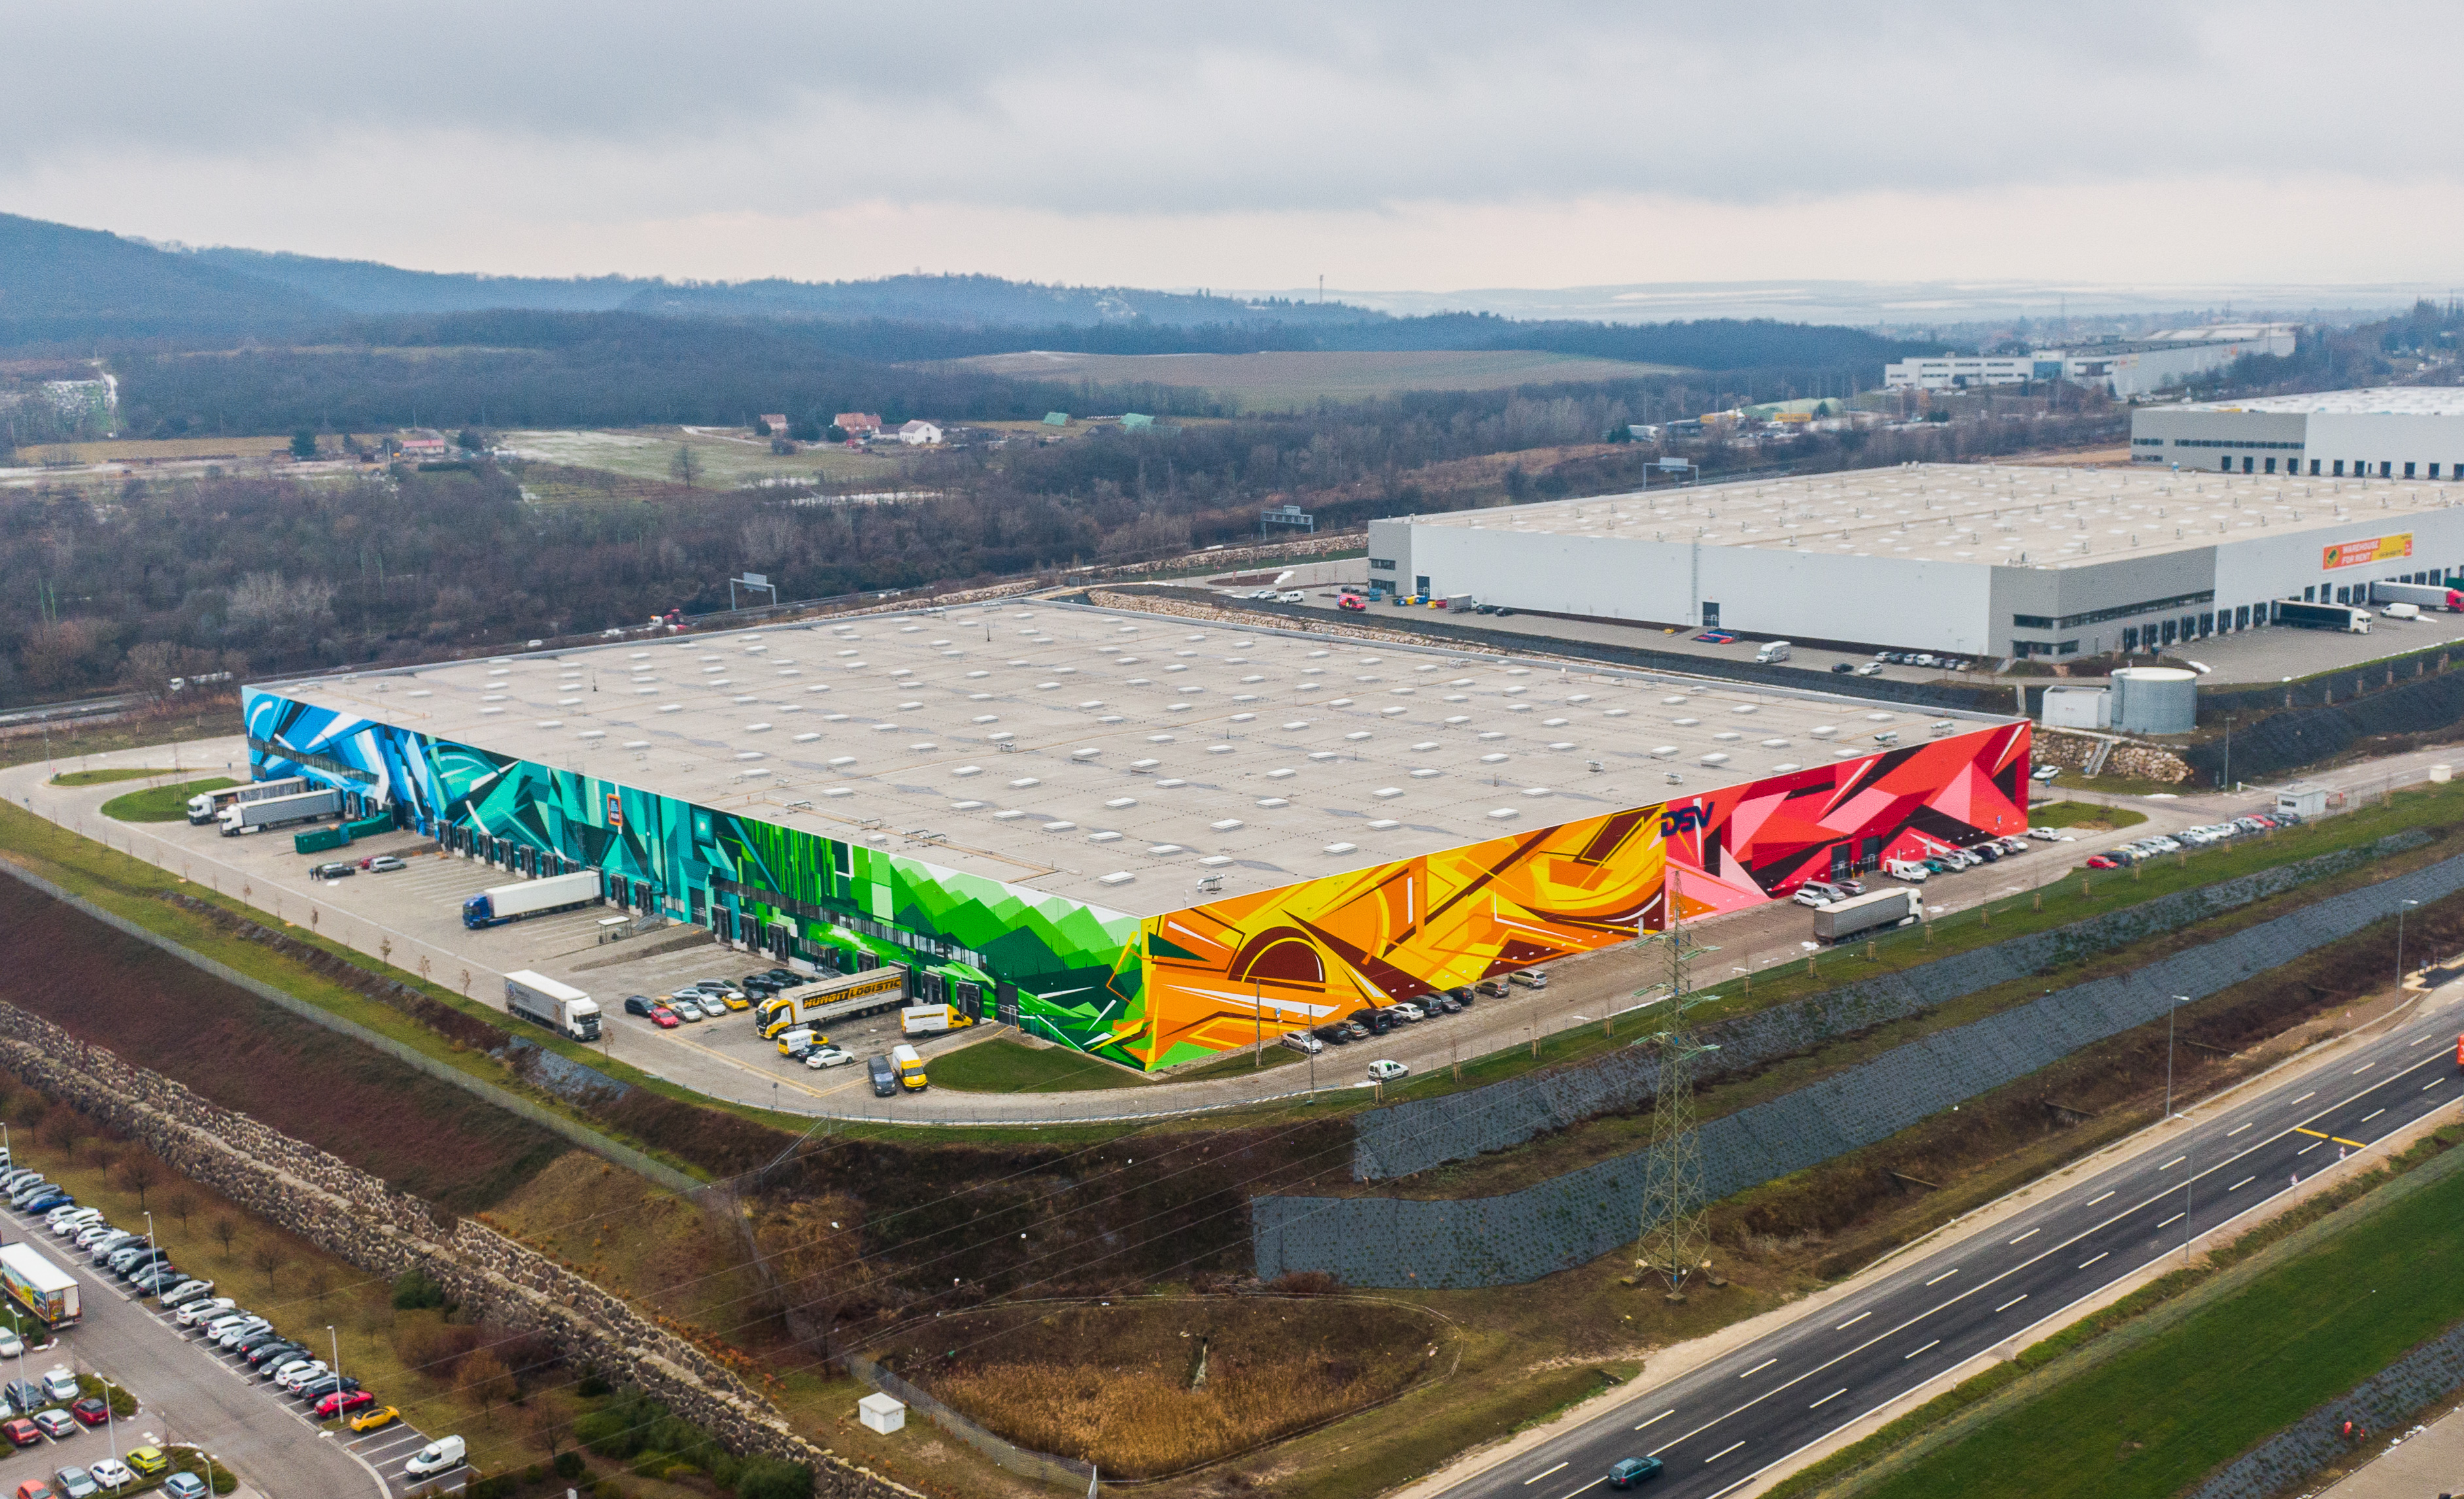 Largest mural in Hungary and CEE now complete